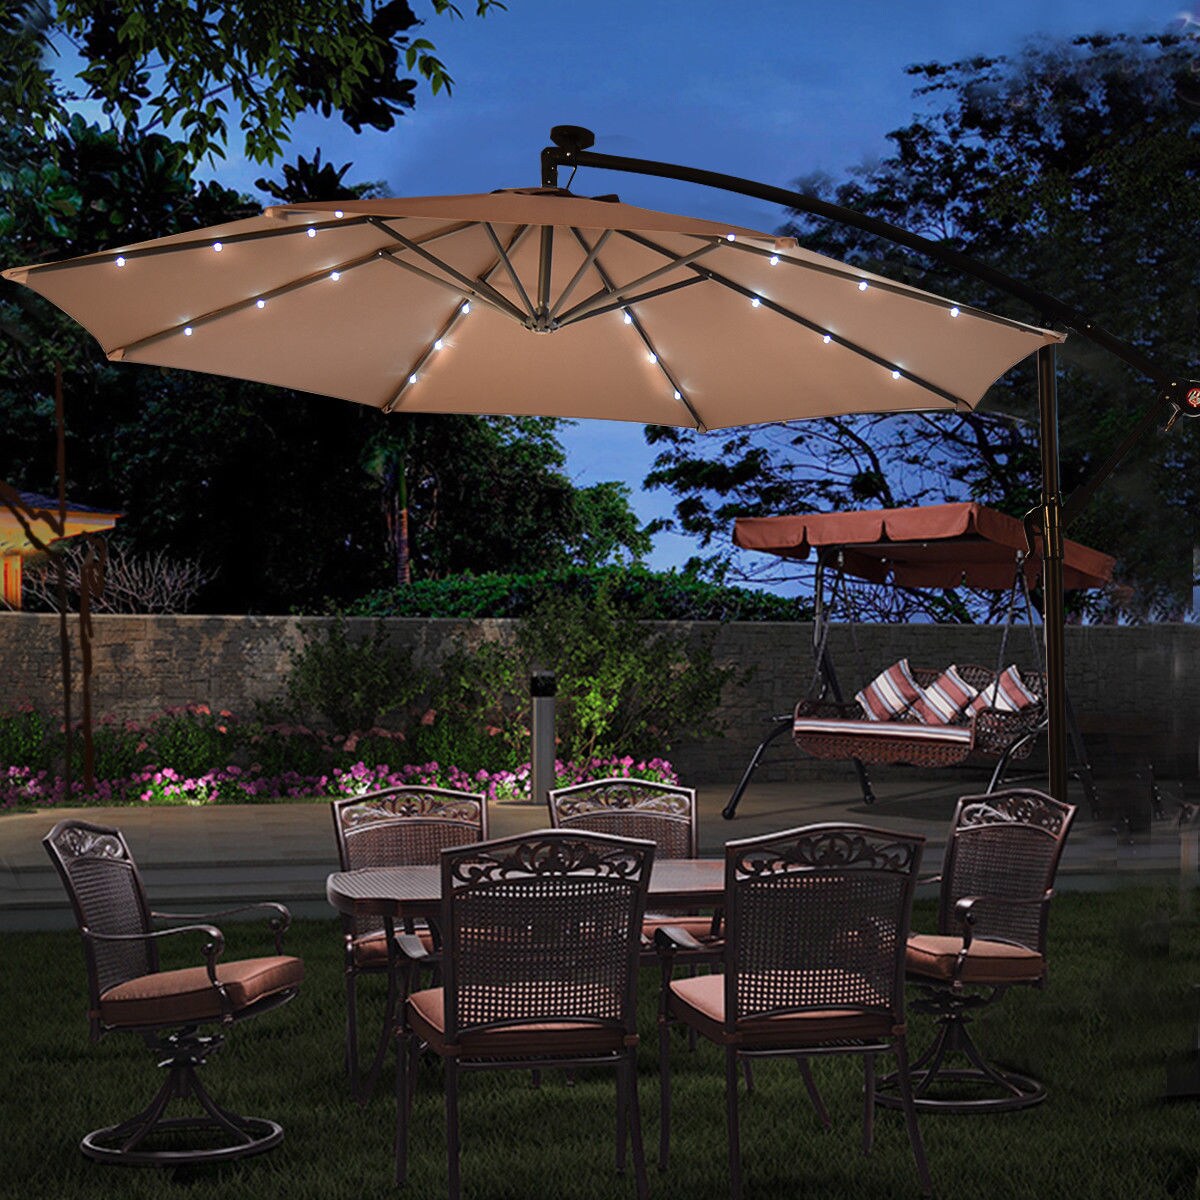 Mefo garden 10ft Solar Patio Outdoor Umbrella Offset Cantilever Hanging Umbrella 360 Degree Rotation with 24 LED Lights and Heavy Duty Steel Cross Base,Beige 